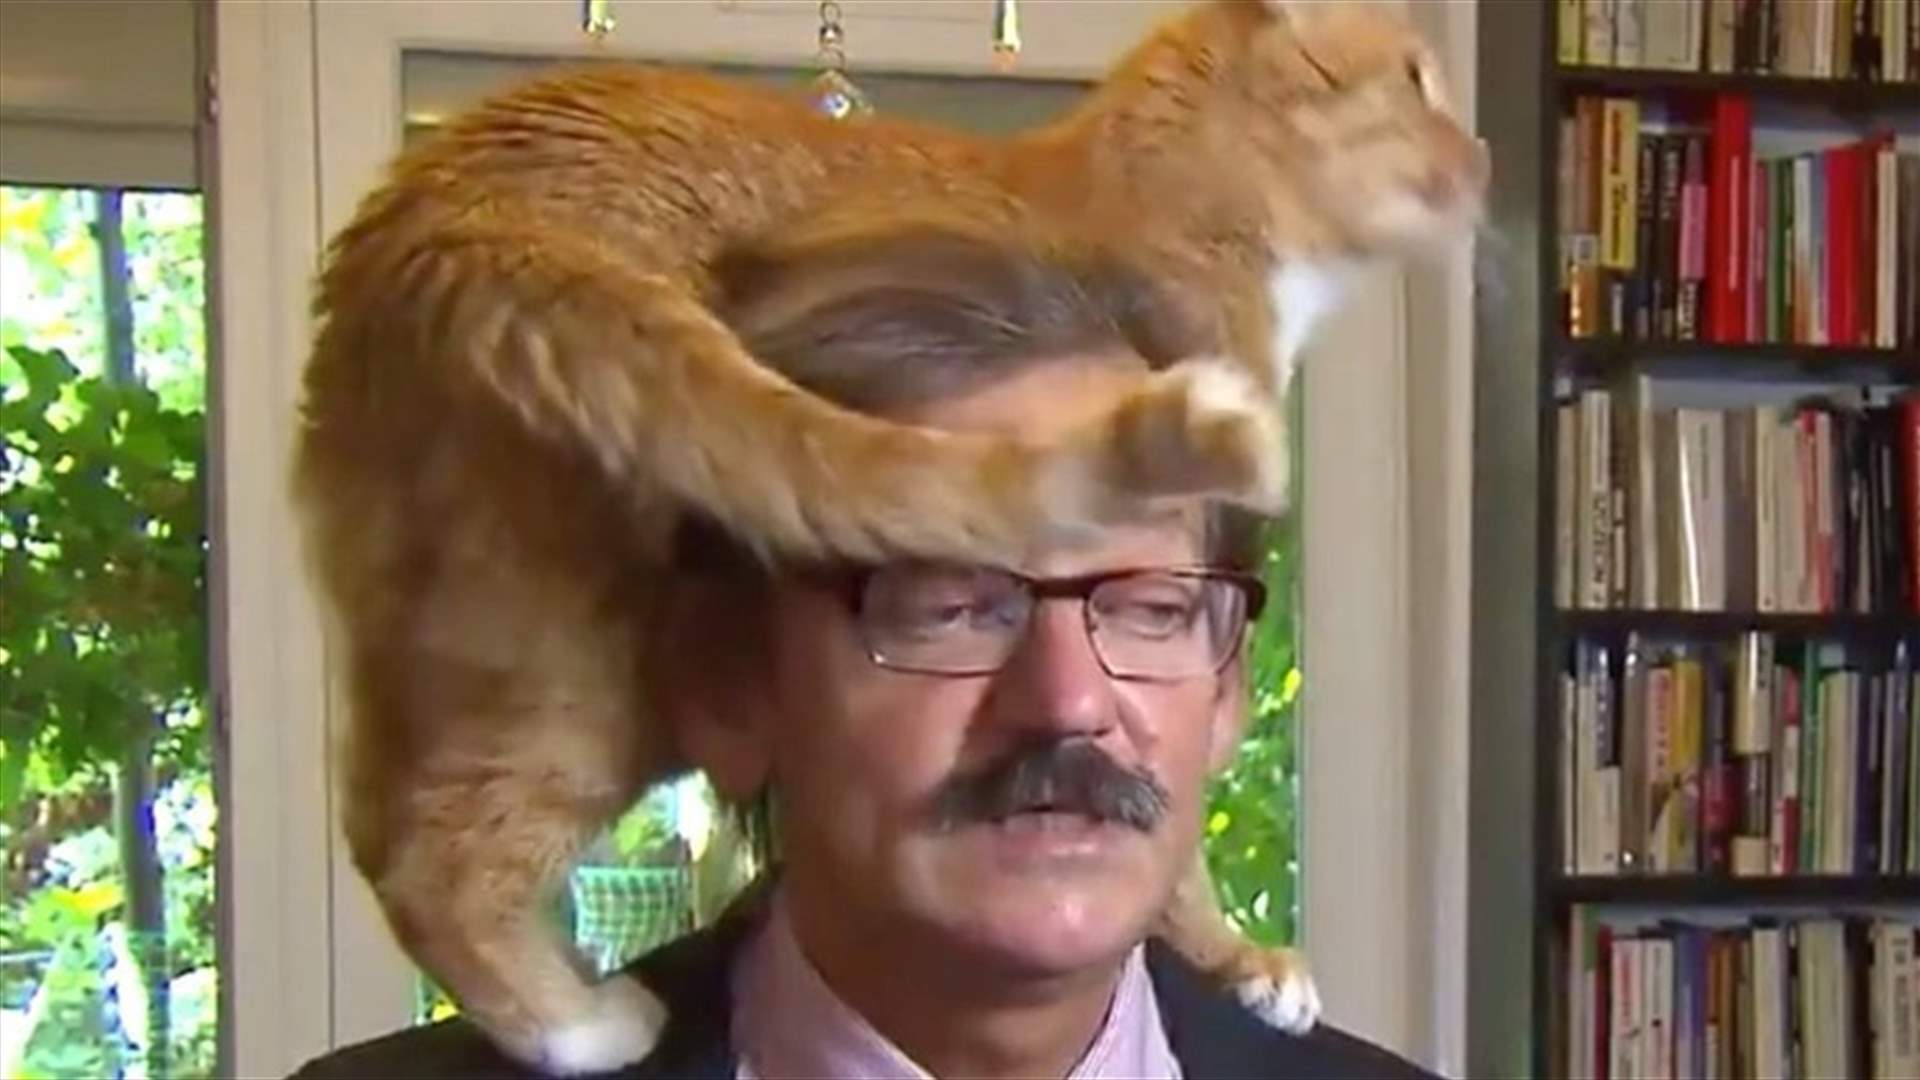 VIDEO – TV Expert’s Cat Climbs On His Head In The Middle Of Interview